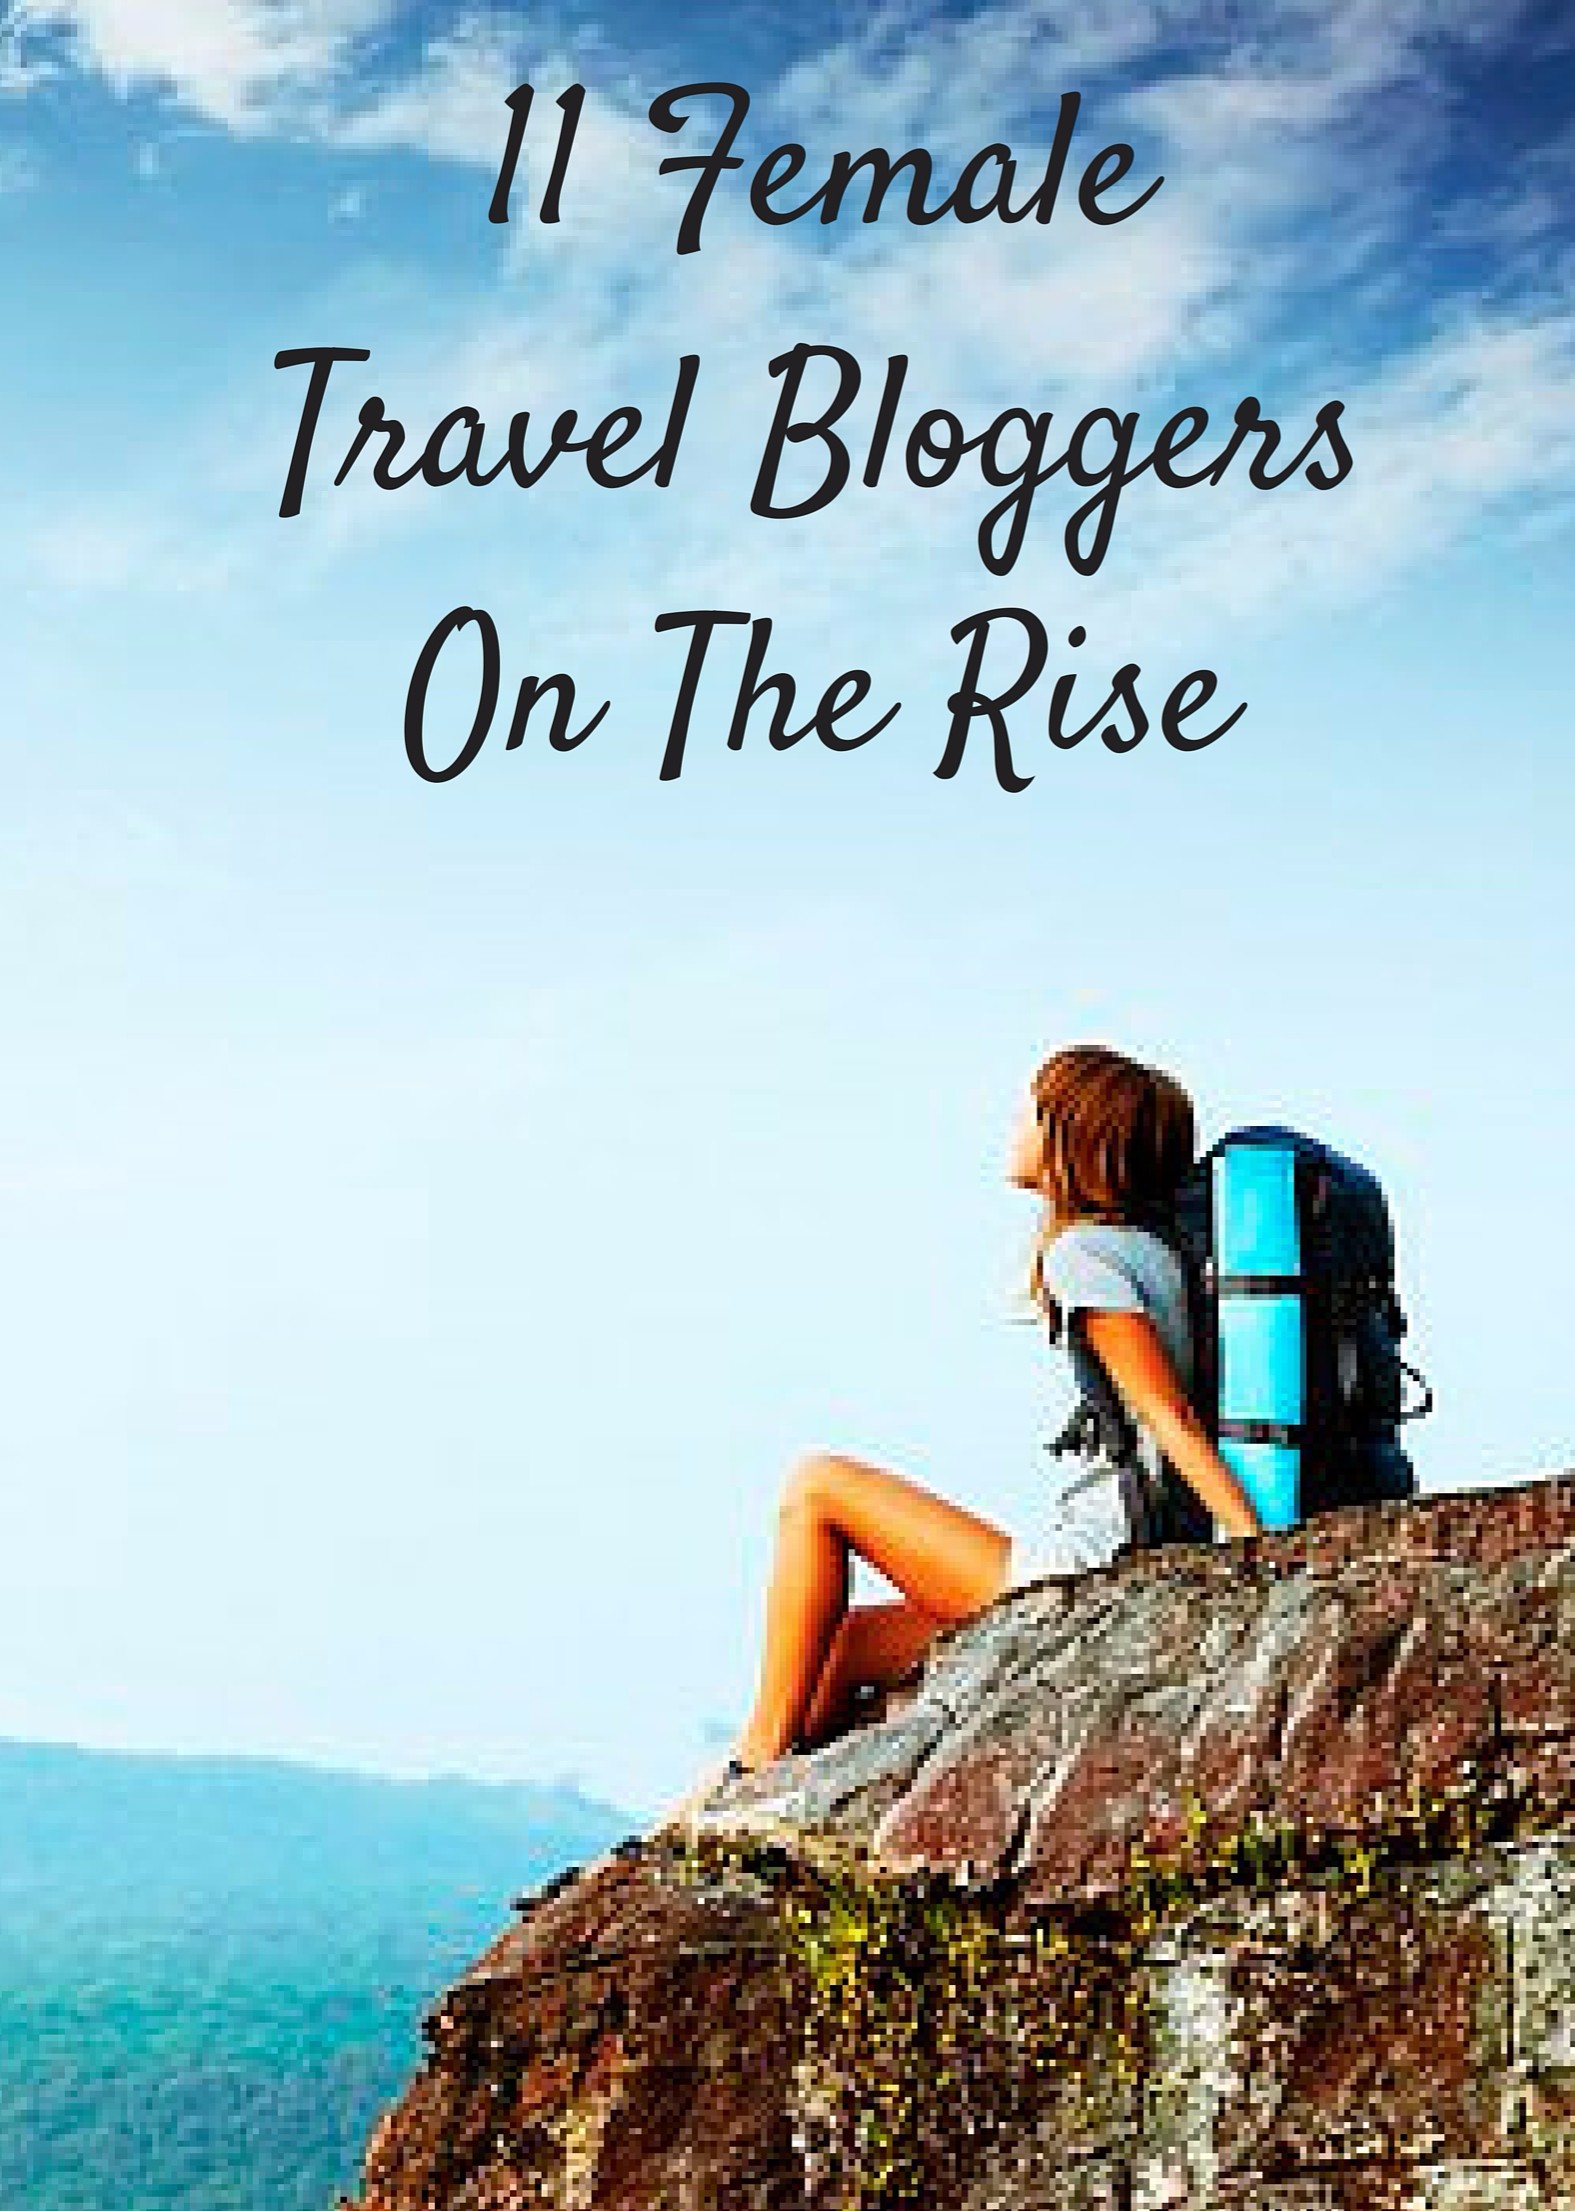 11 Female Travel Bloggers On The Rise - Journalist On The Run